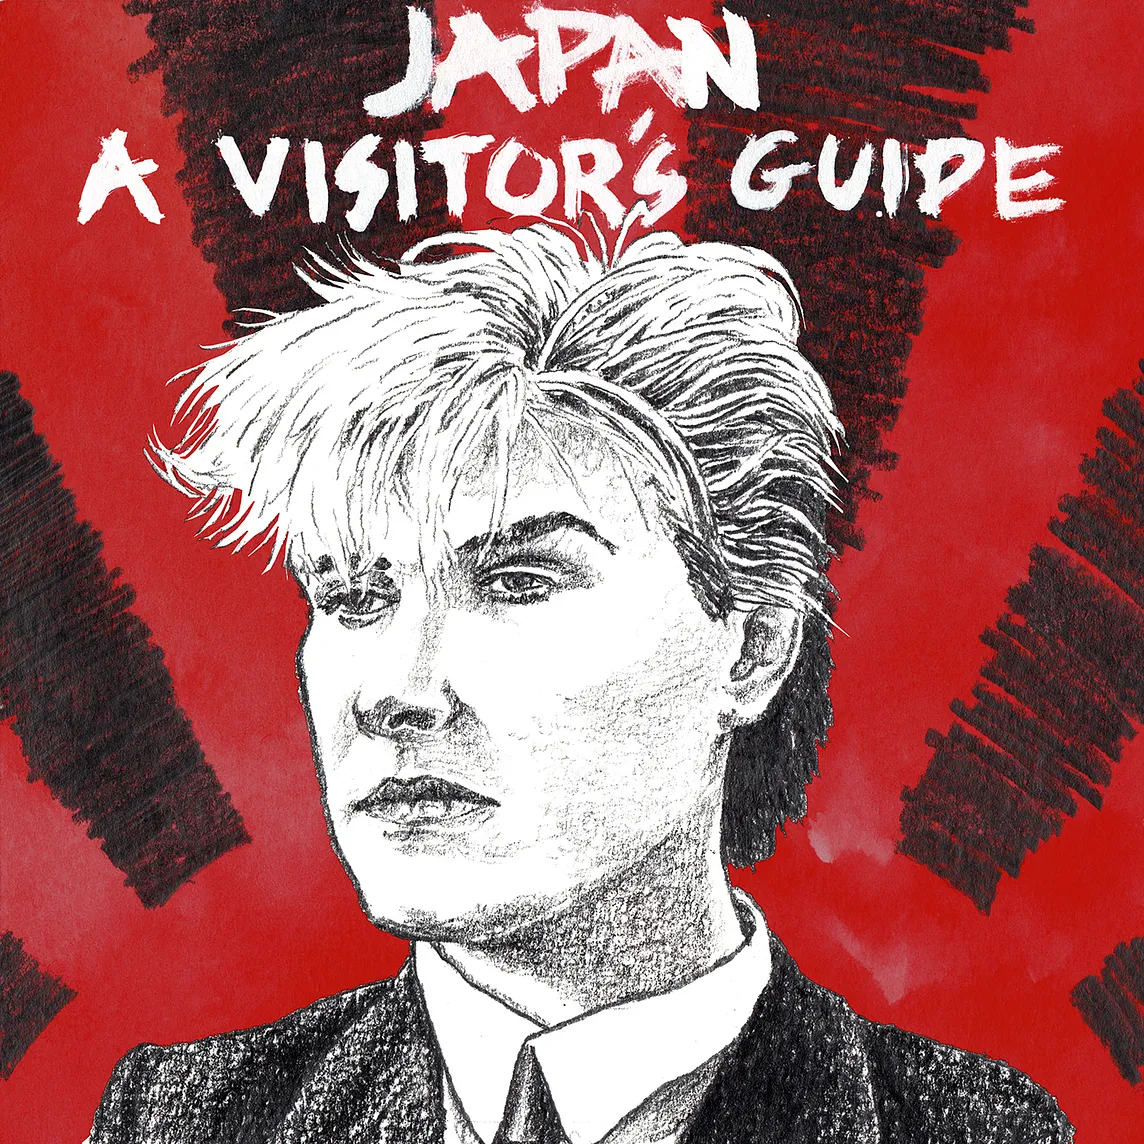 Japan: A visitor’s guide to one of modern pop’s most influential but under-rated bands